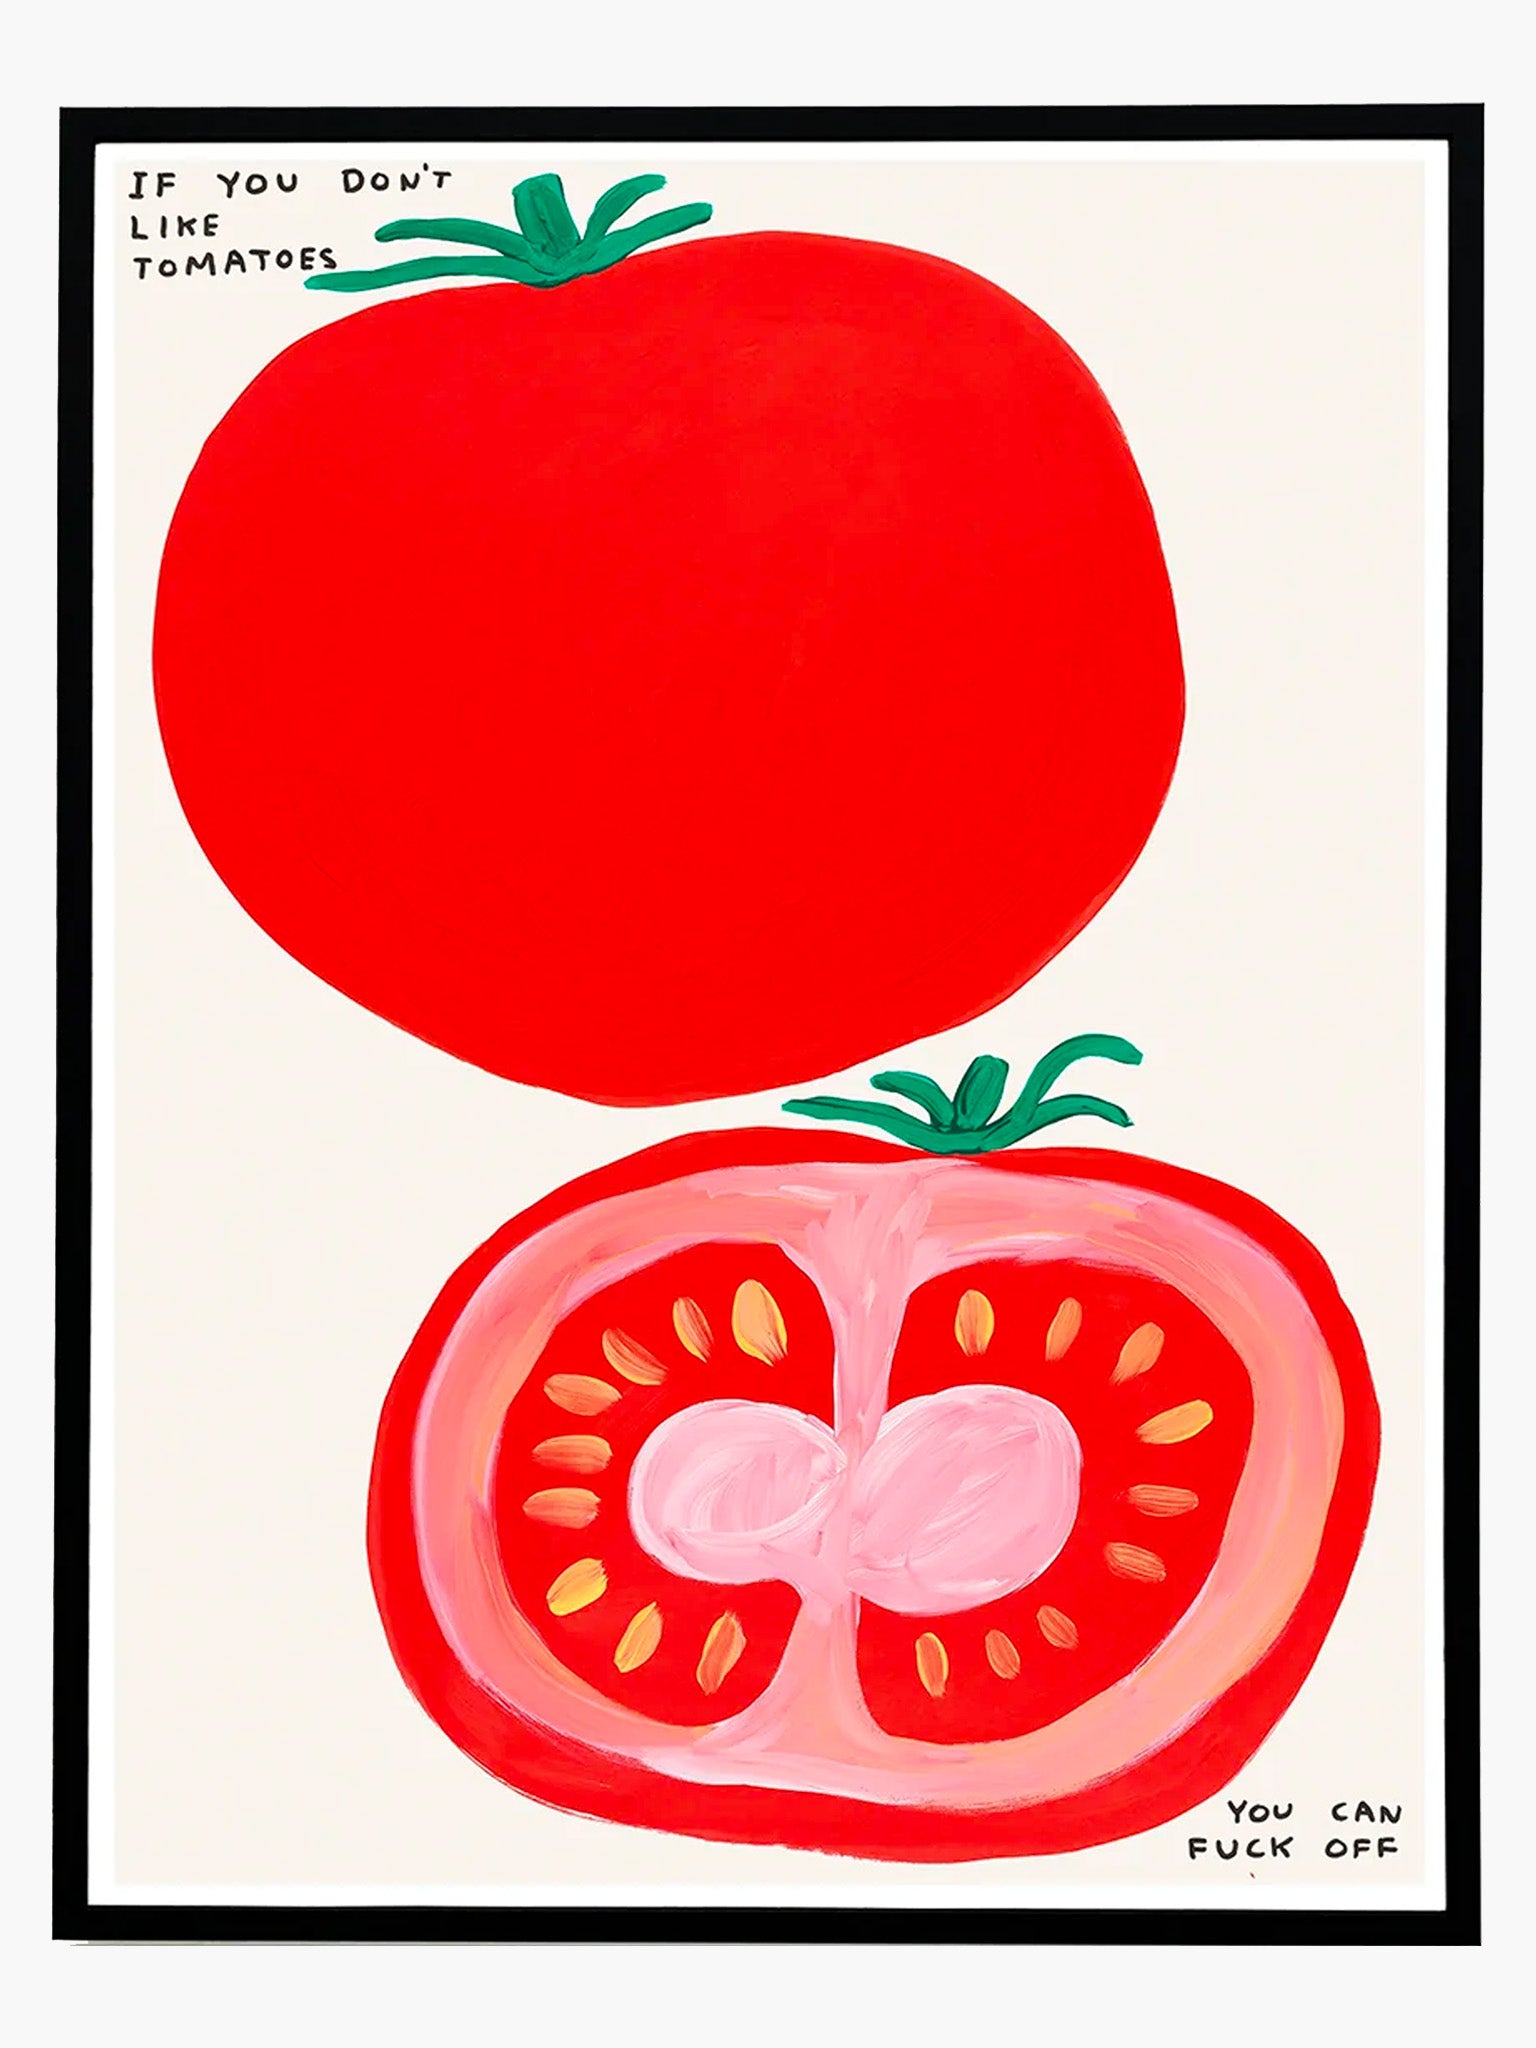 If You Don't Like Tomatoes Poster by David Shrigley (60 x 80 cm)